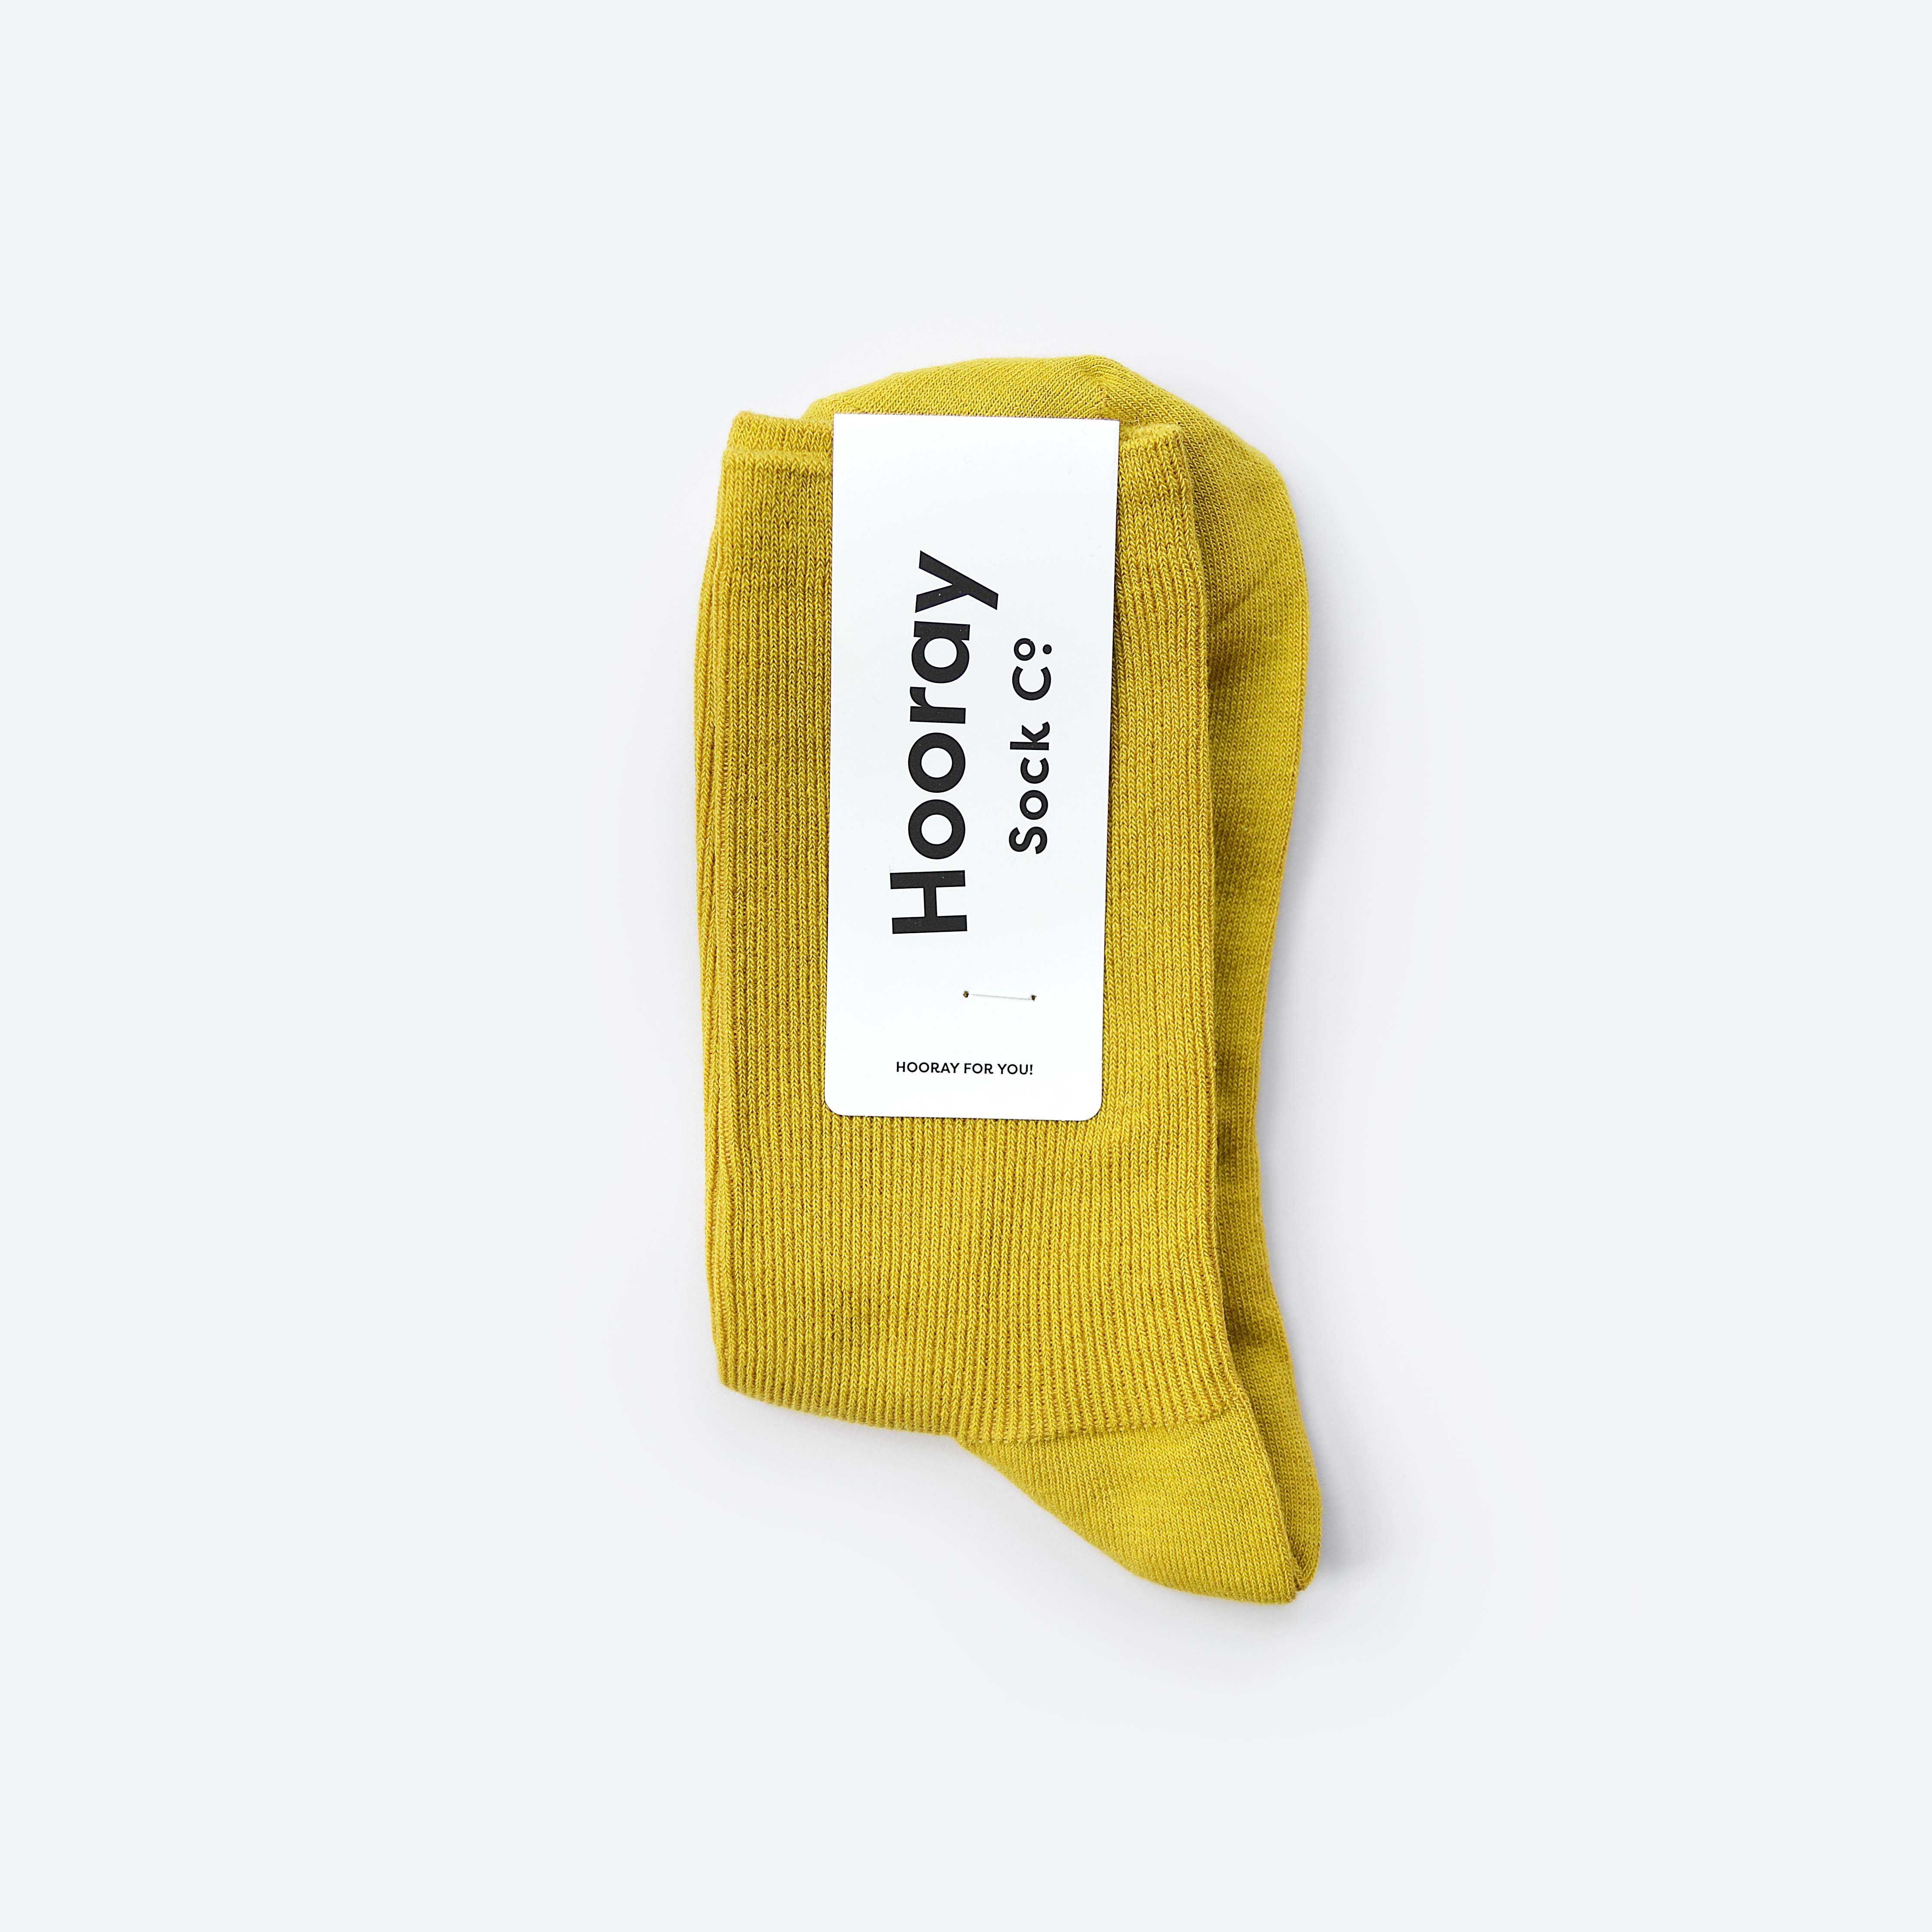 Hooray Sock Co.&#39;s Munsell Crew Socks: Vibrant style in bright Green Yellow. Shorter crew length. 80% cotton, 20% spandex. Made in South Korea. Small (Women&#39;s 4-10).